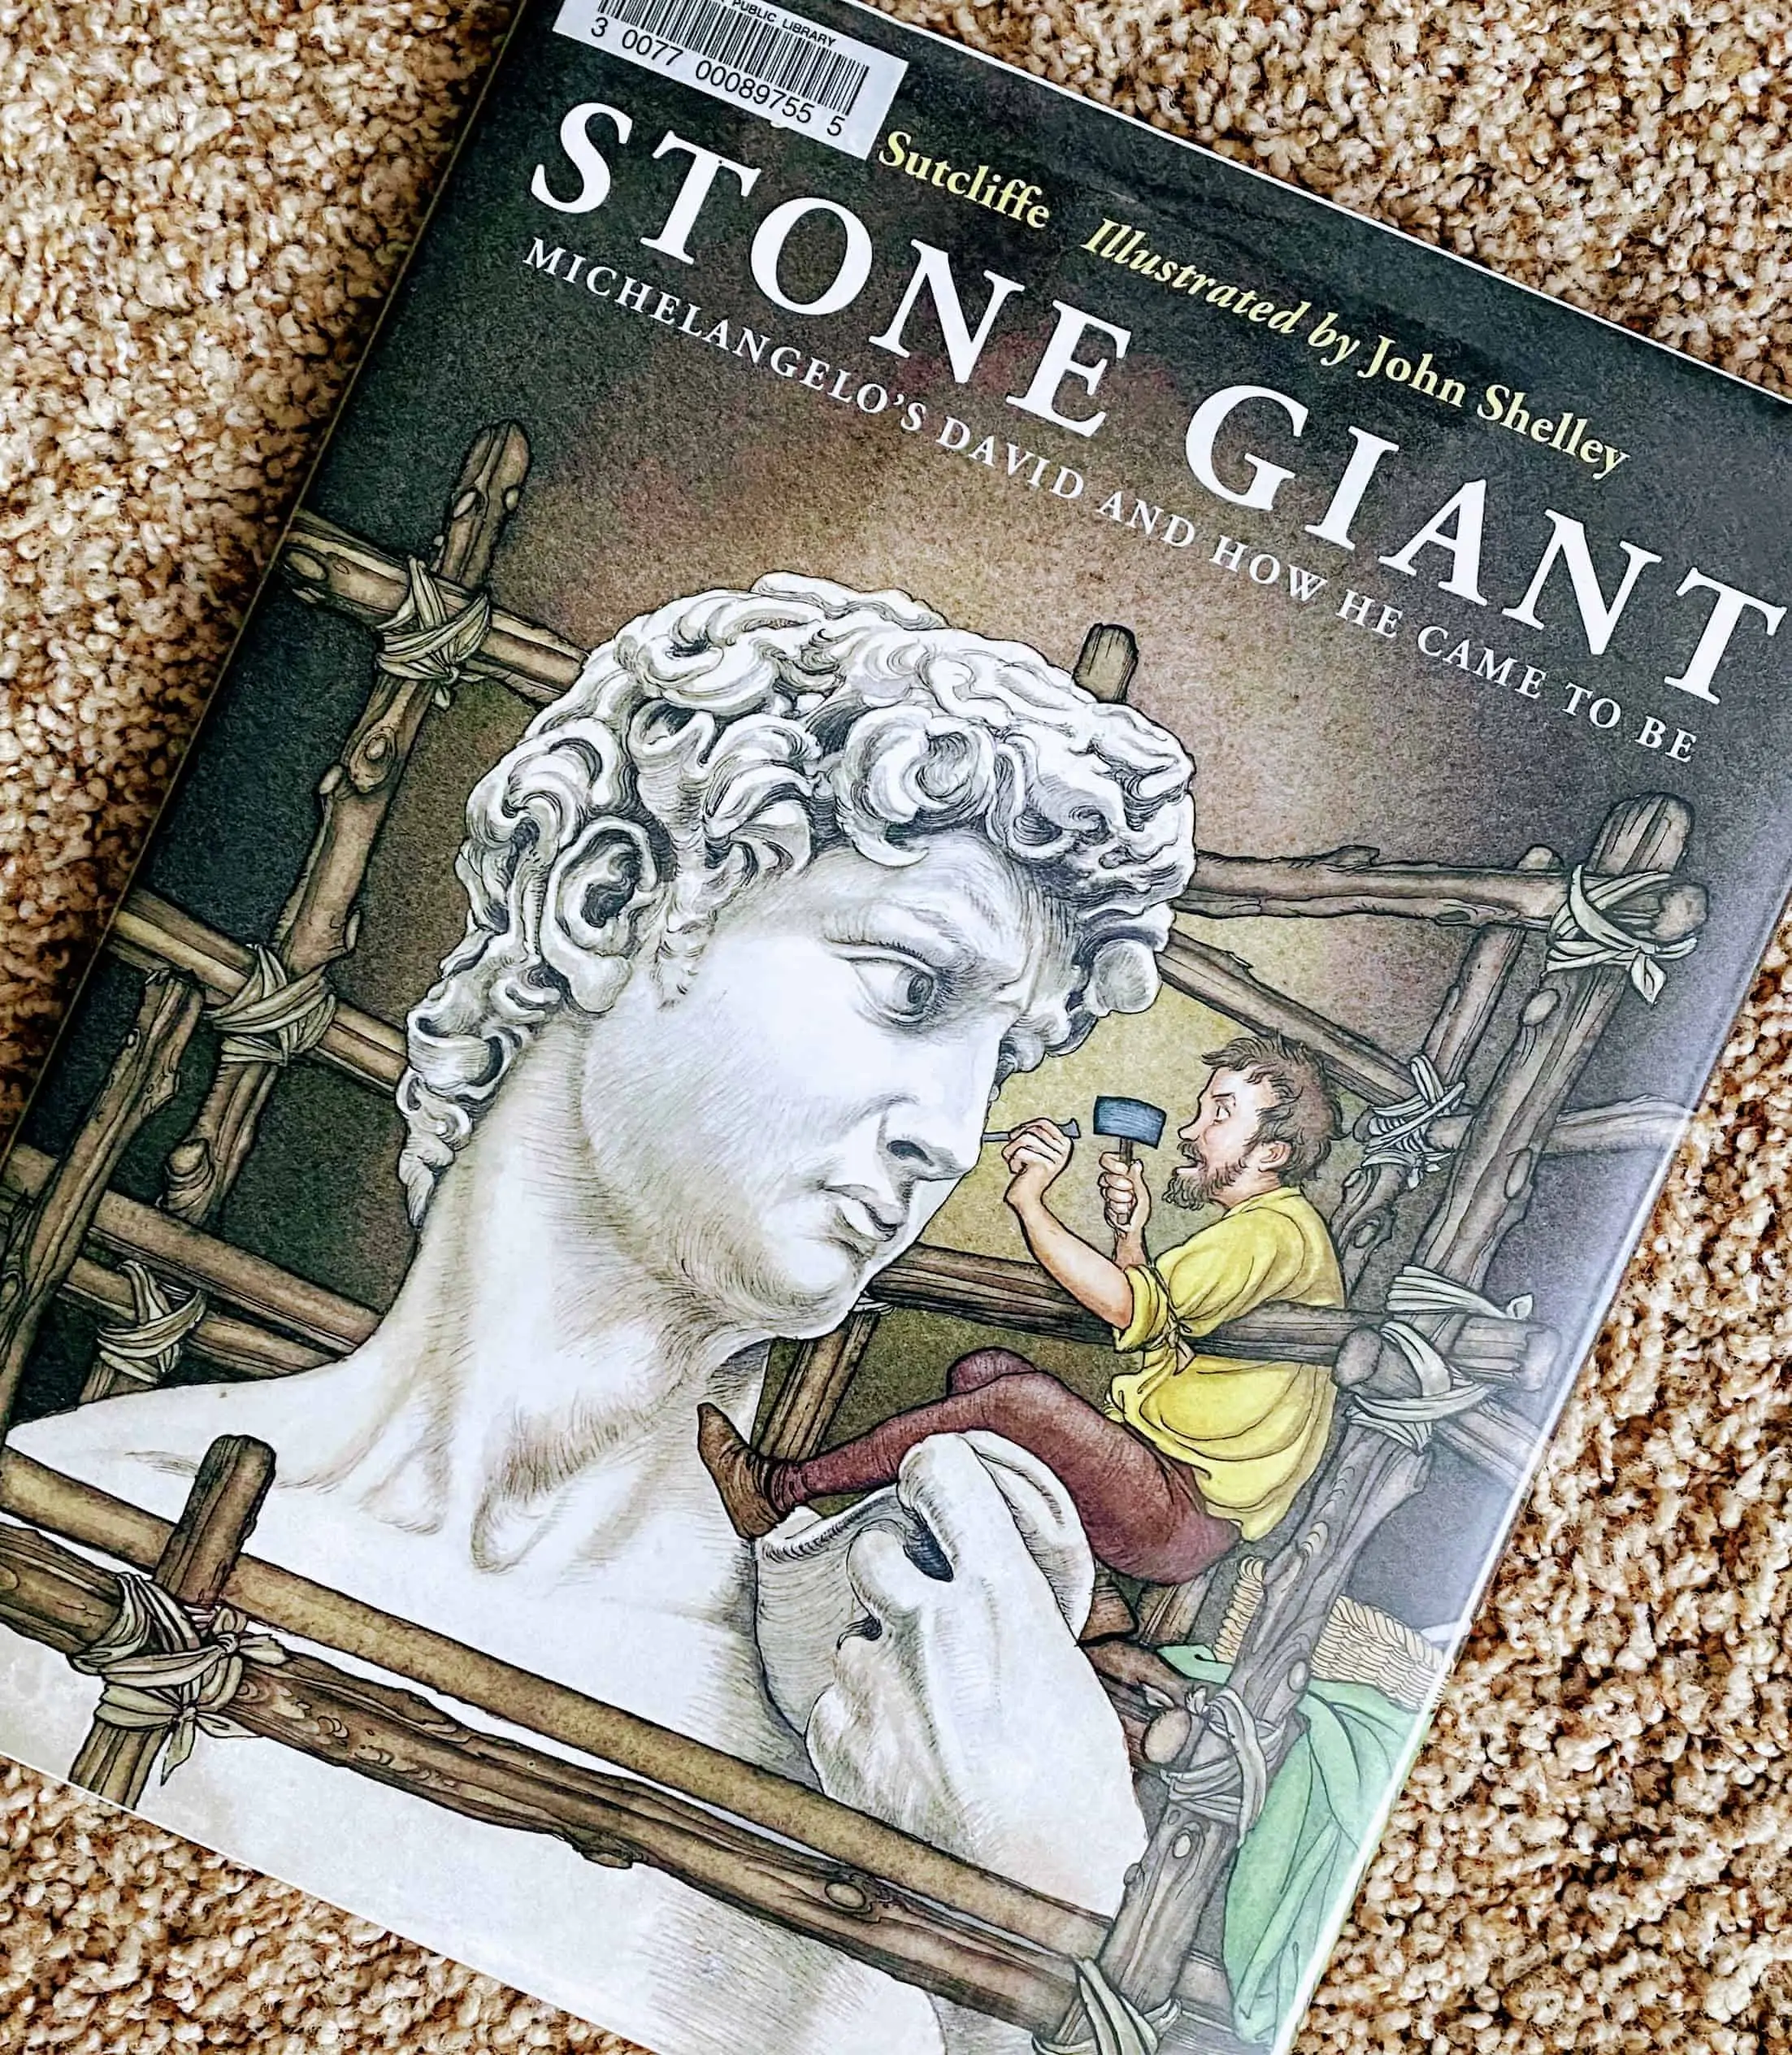 Stone Giant book on a beige carpet.